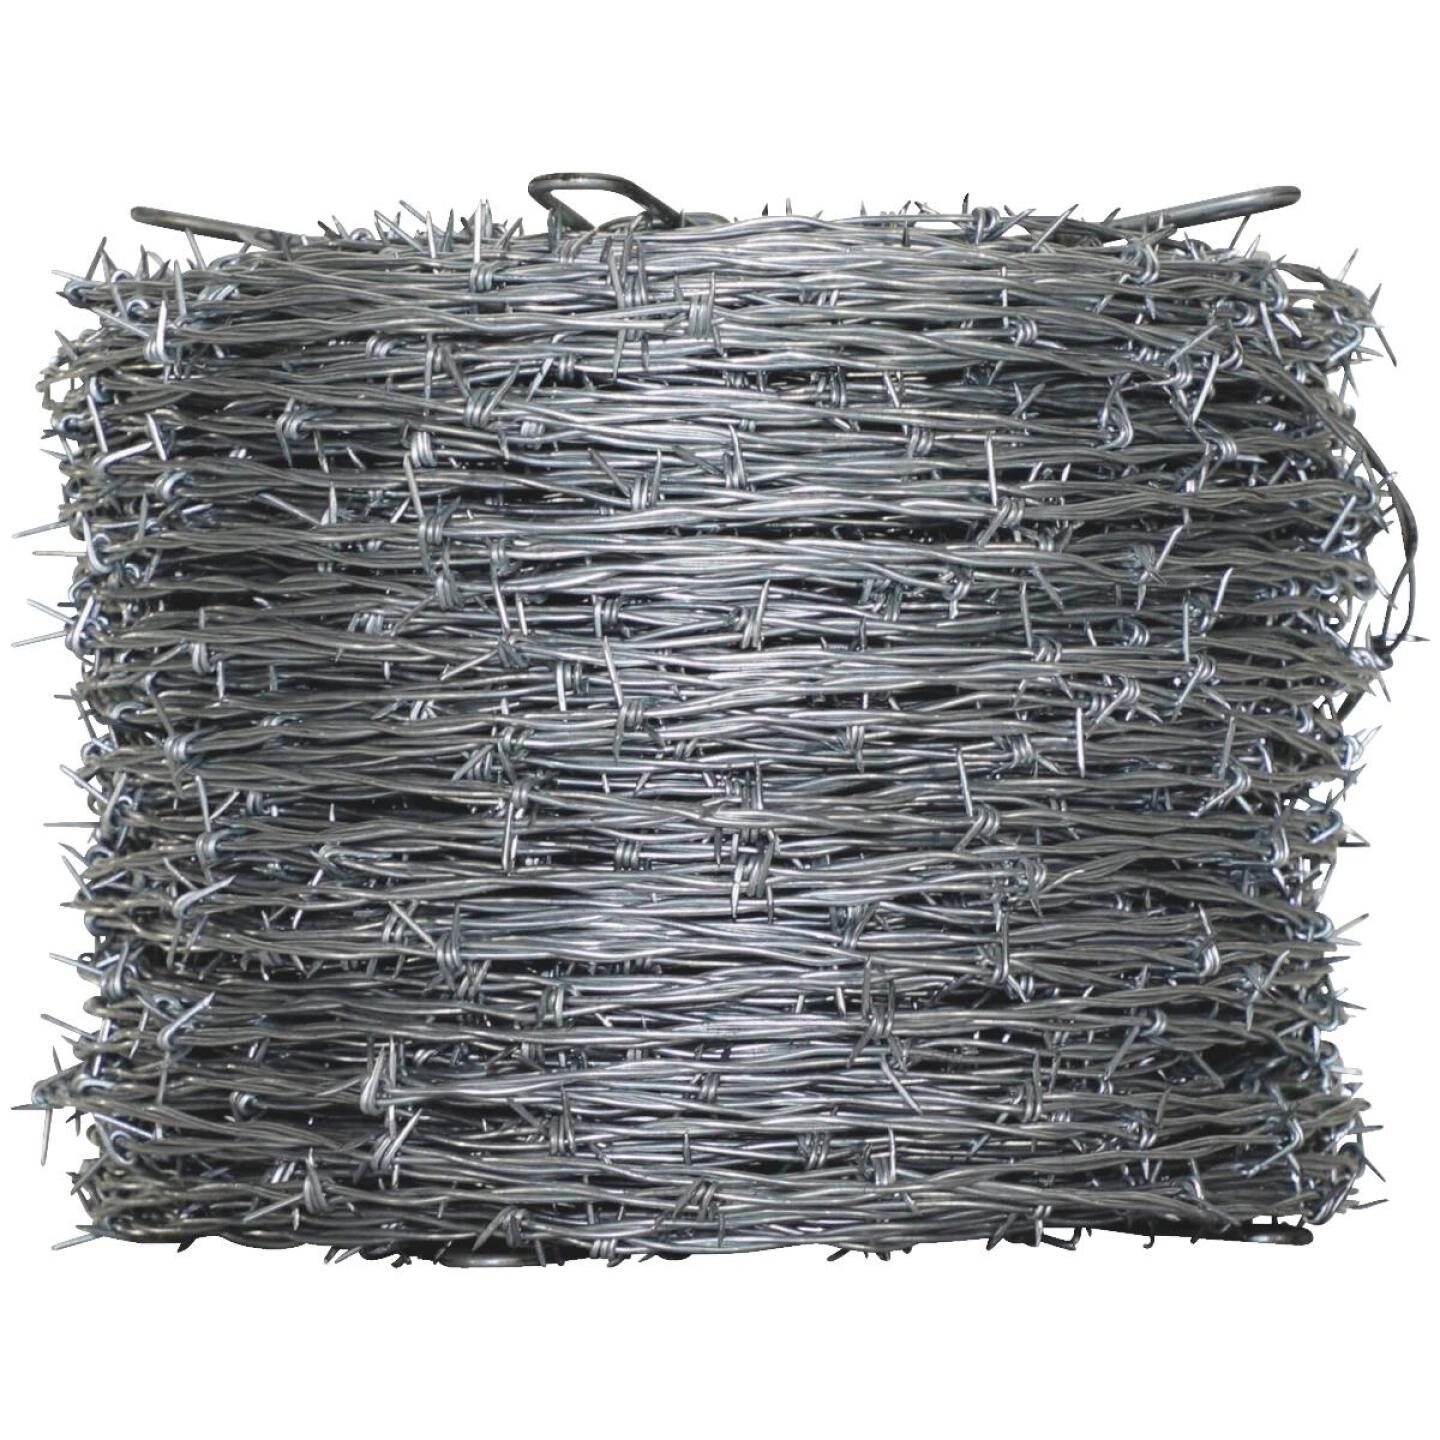 Oklahoma Steel & Wire, Oklahoma Steel & Wire 1320 Ft. x 12.5 Ga. 4 Pt. Barbed Wire